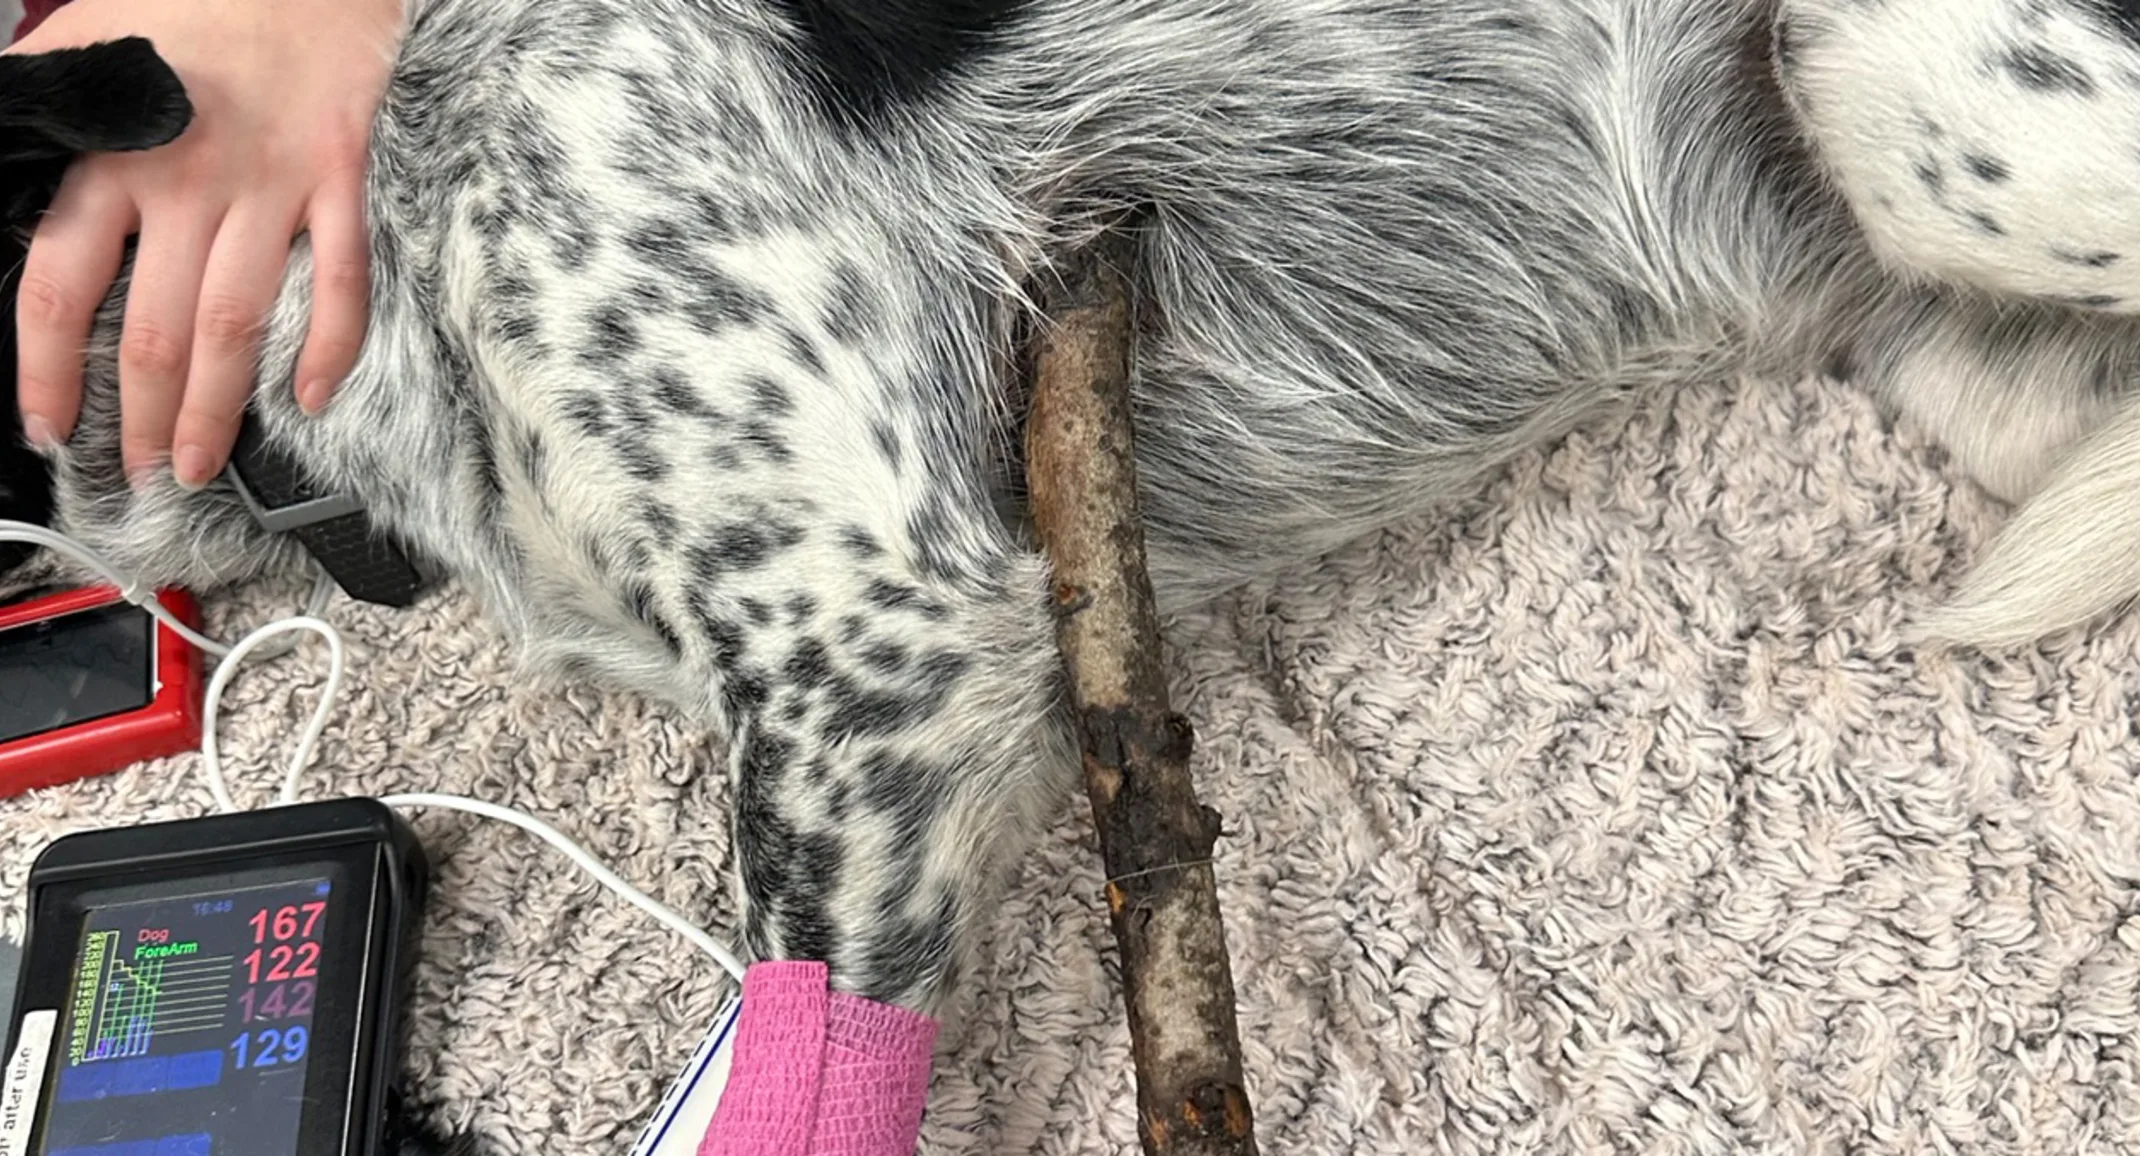 An image of Delta, an Australian Cattle Dog, with a large stick protruding from her body.